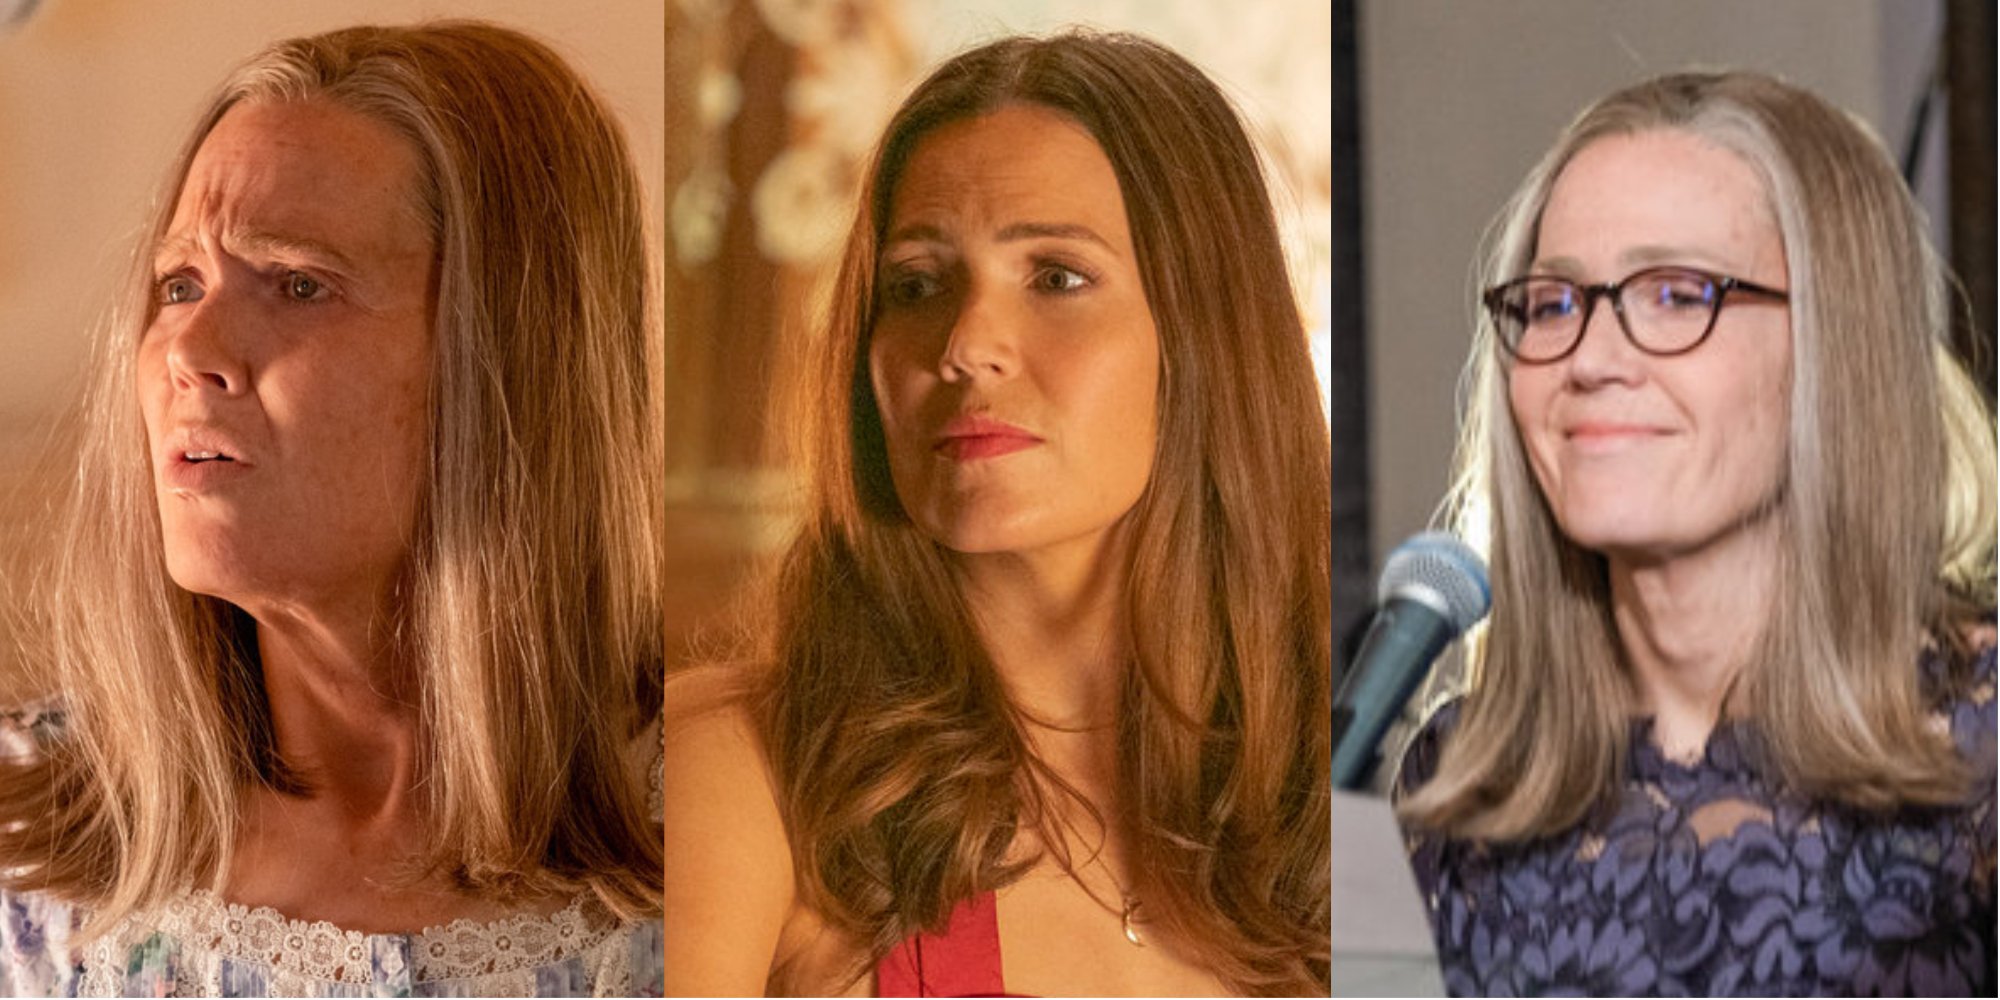 Mandy Moore in the various stages of playing 'This Is Us' character Rebecca Pearson.